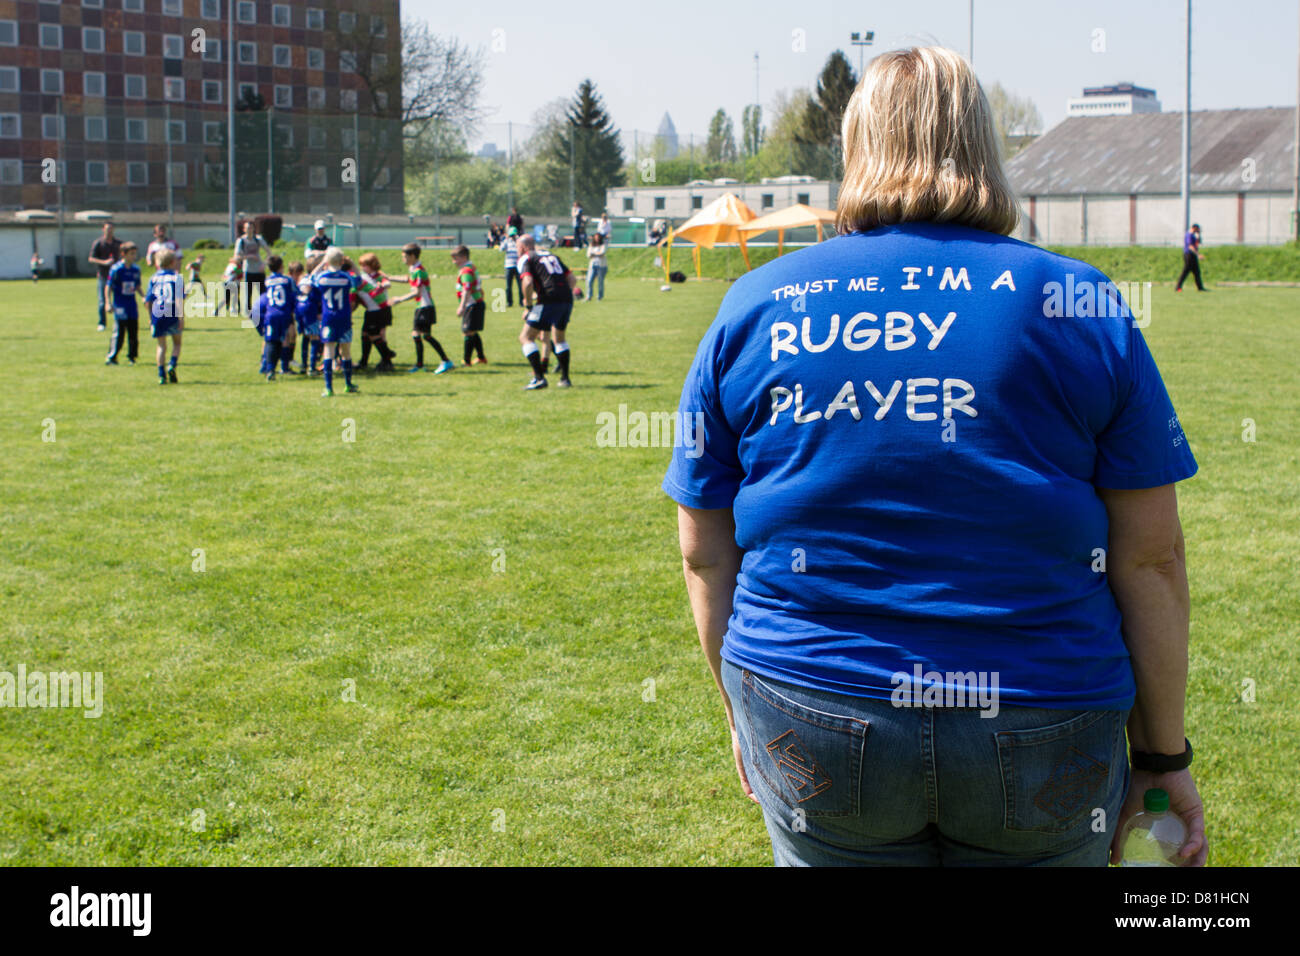 A woman with a 'Trust me, I'm a rugby player' t-shirt watches a children's rugby match Stock Photo